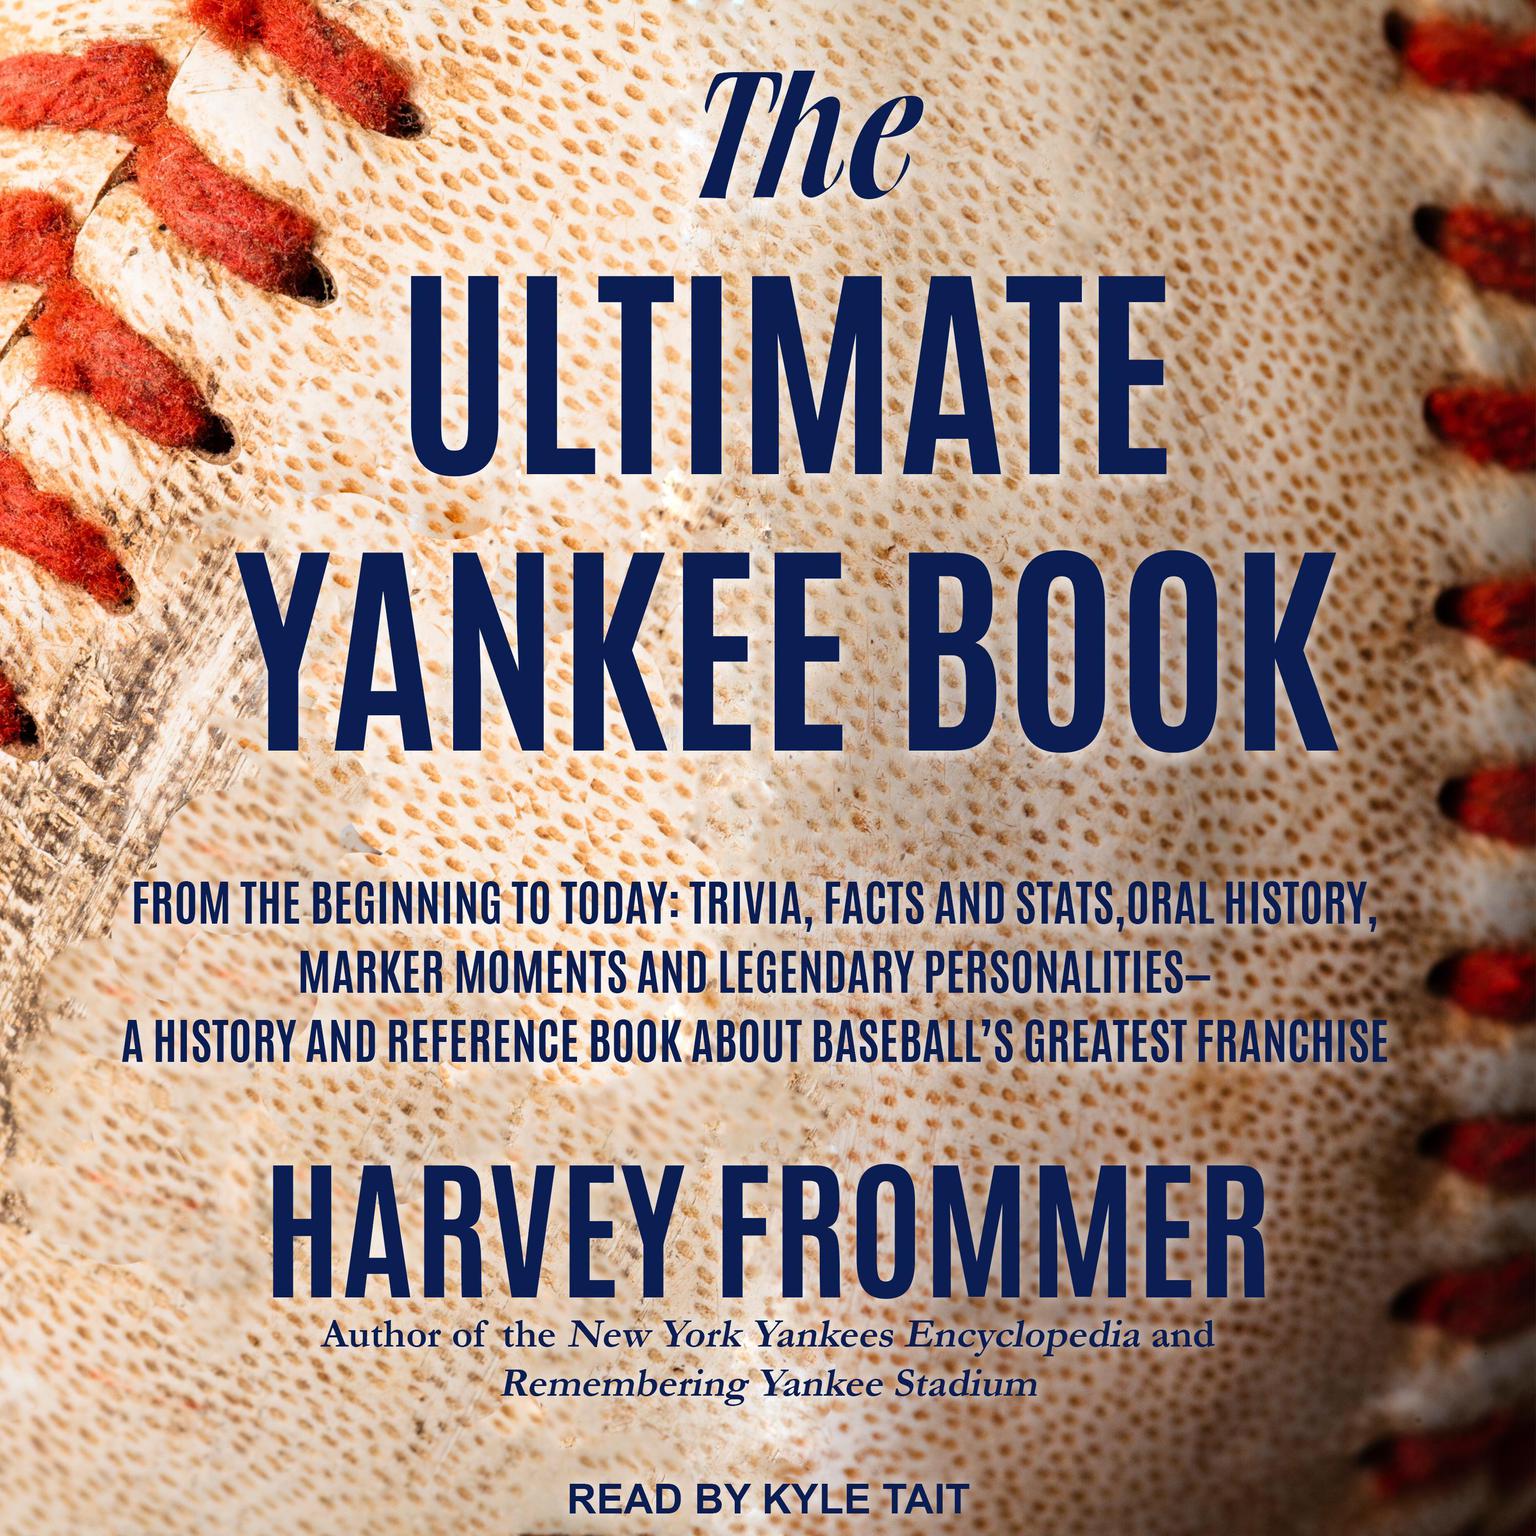 The Ultimate Yankee Book: From the Beginning to Today: Trivia, Facts and Stats, Oral History, Marker Moments and Legendary Personalities - A History and Reference Book About Baseball’s Greatest Franchise Audiobook, by Harvey Frommer